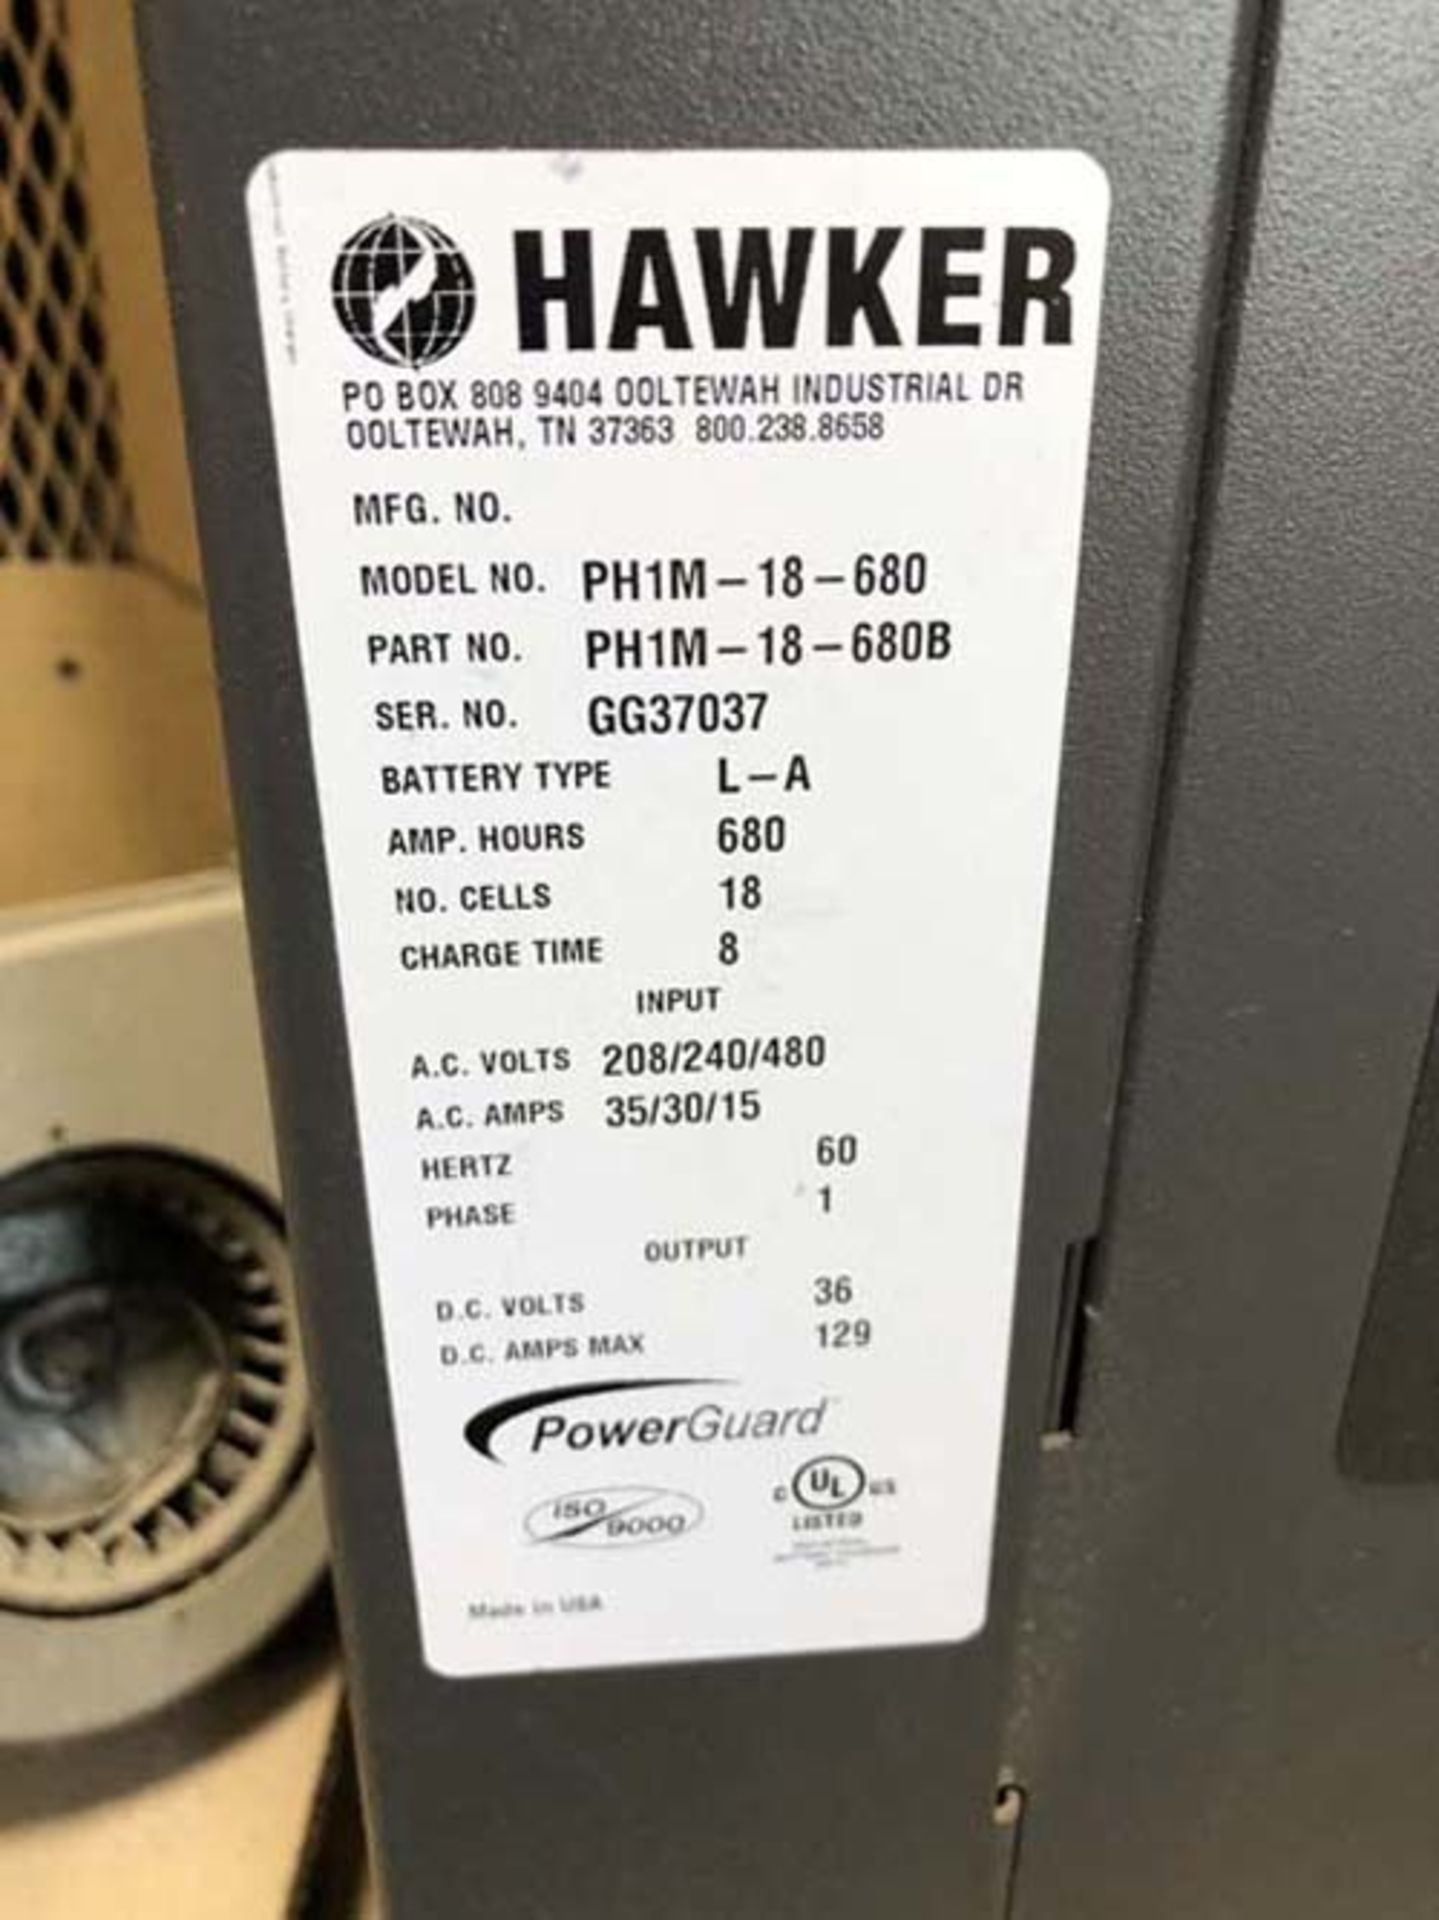 Hawker Battery Charger, 36 Volt, Mdl: PH1M-18-680, S/N: GG37037, Located In: Huntington Park, CA - Image 2 of 2